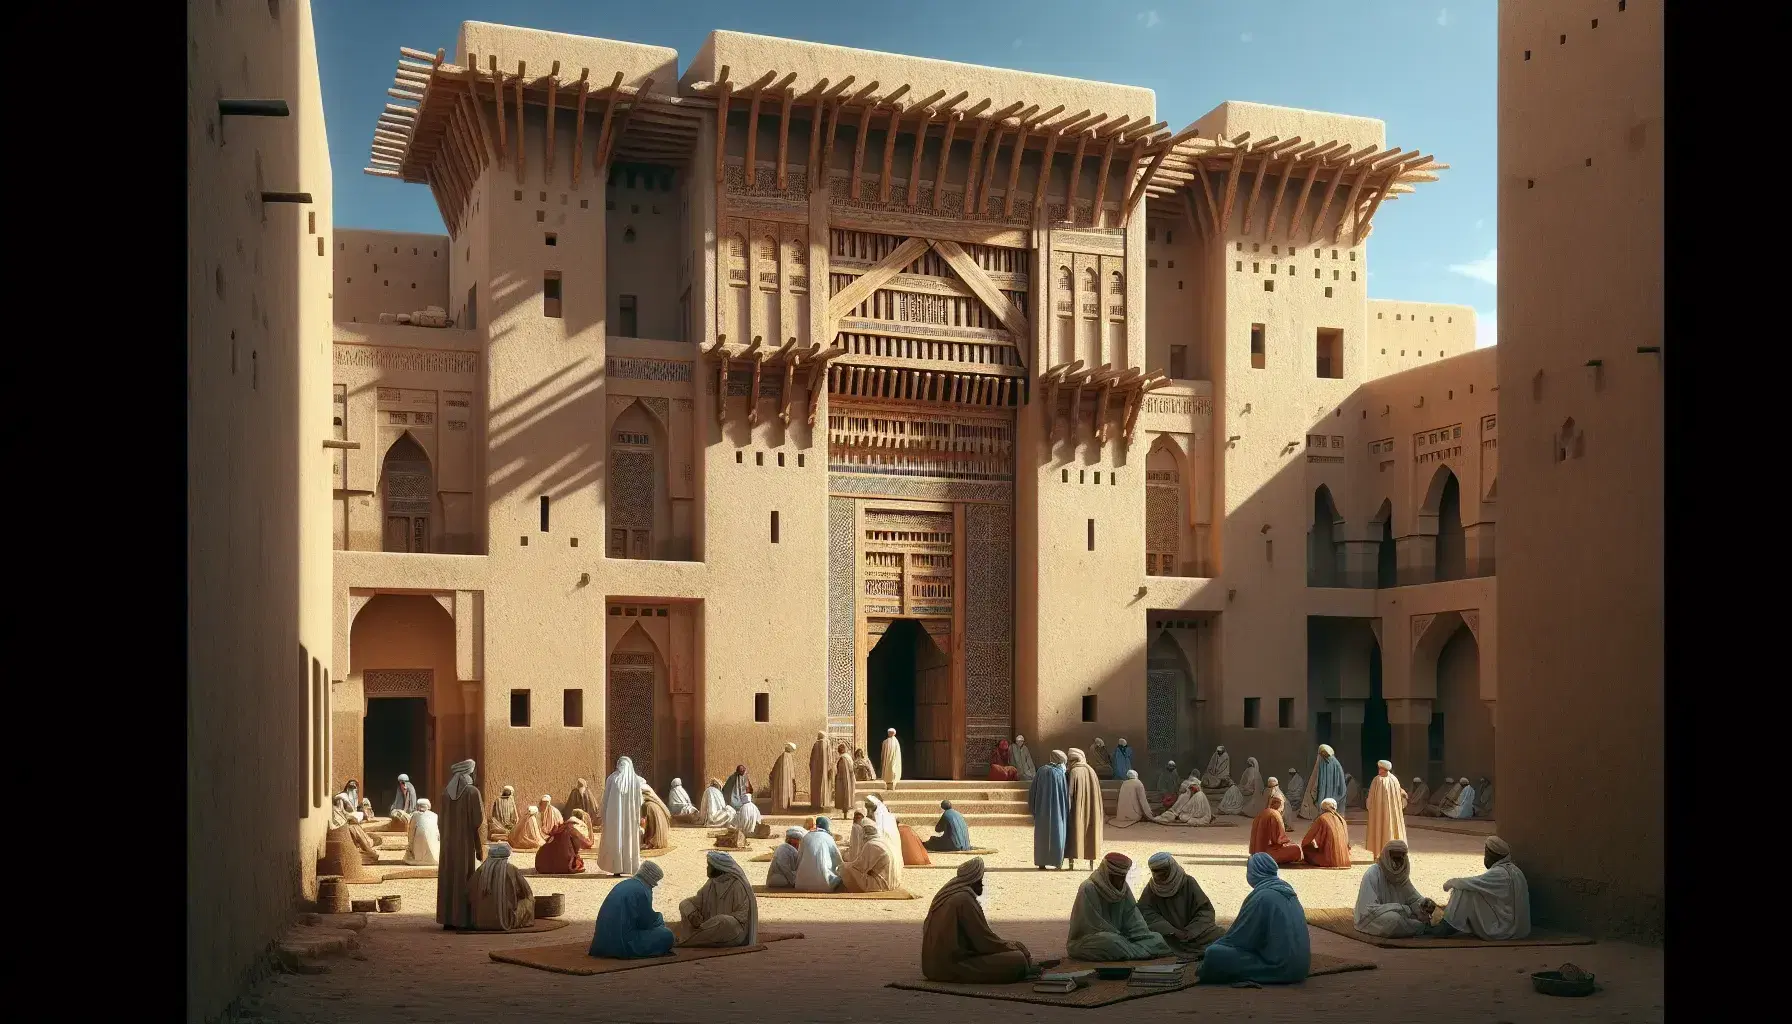 Ancient Saharan stone building with wooden beams, ornate door, and students in traditional robes gathered in a palm-lined courtyard under a clear blue sky.